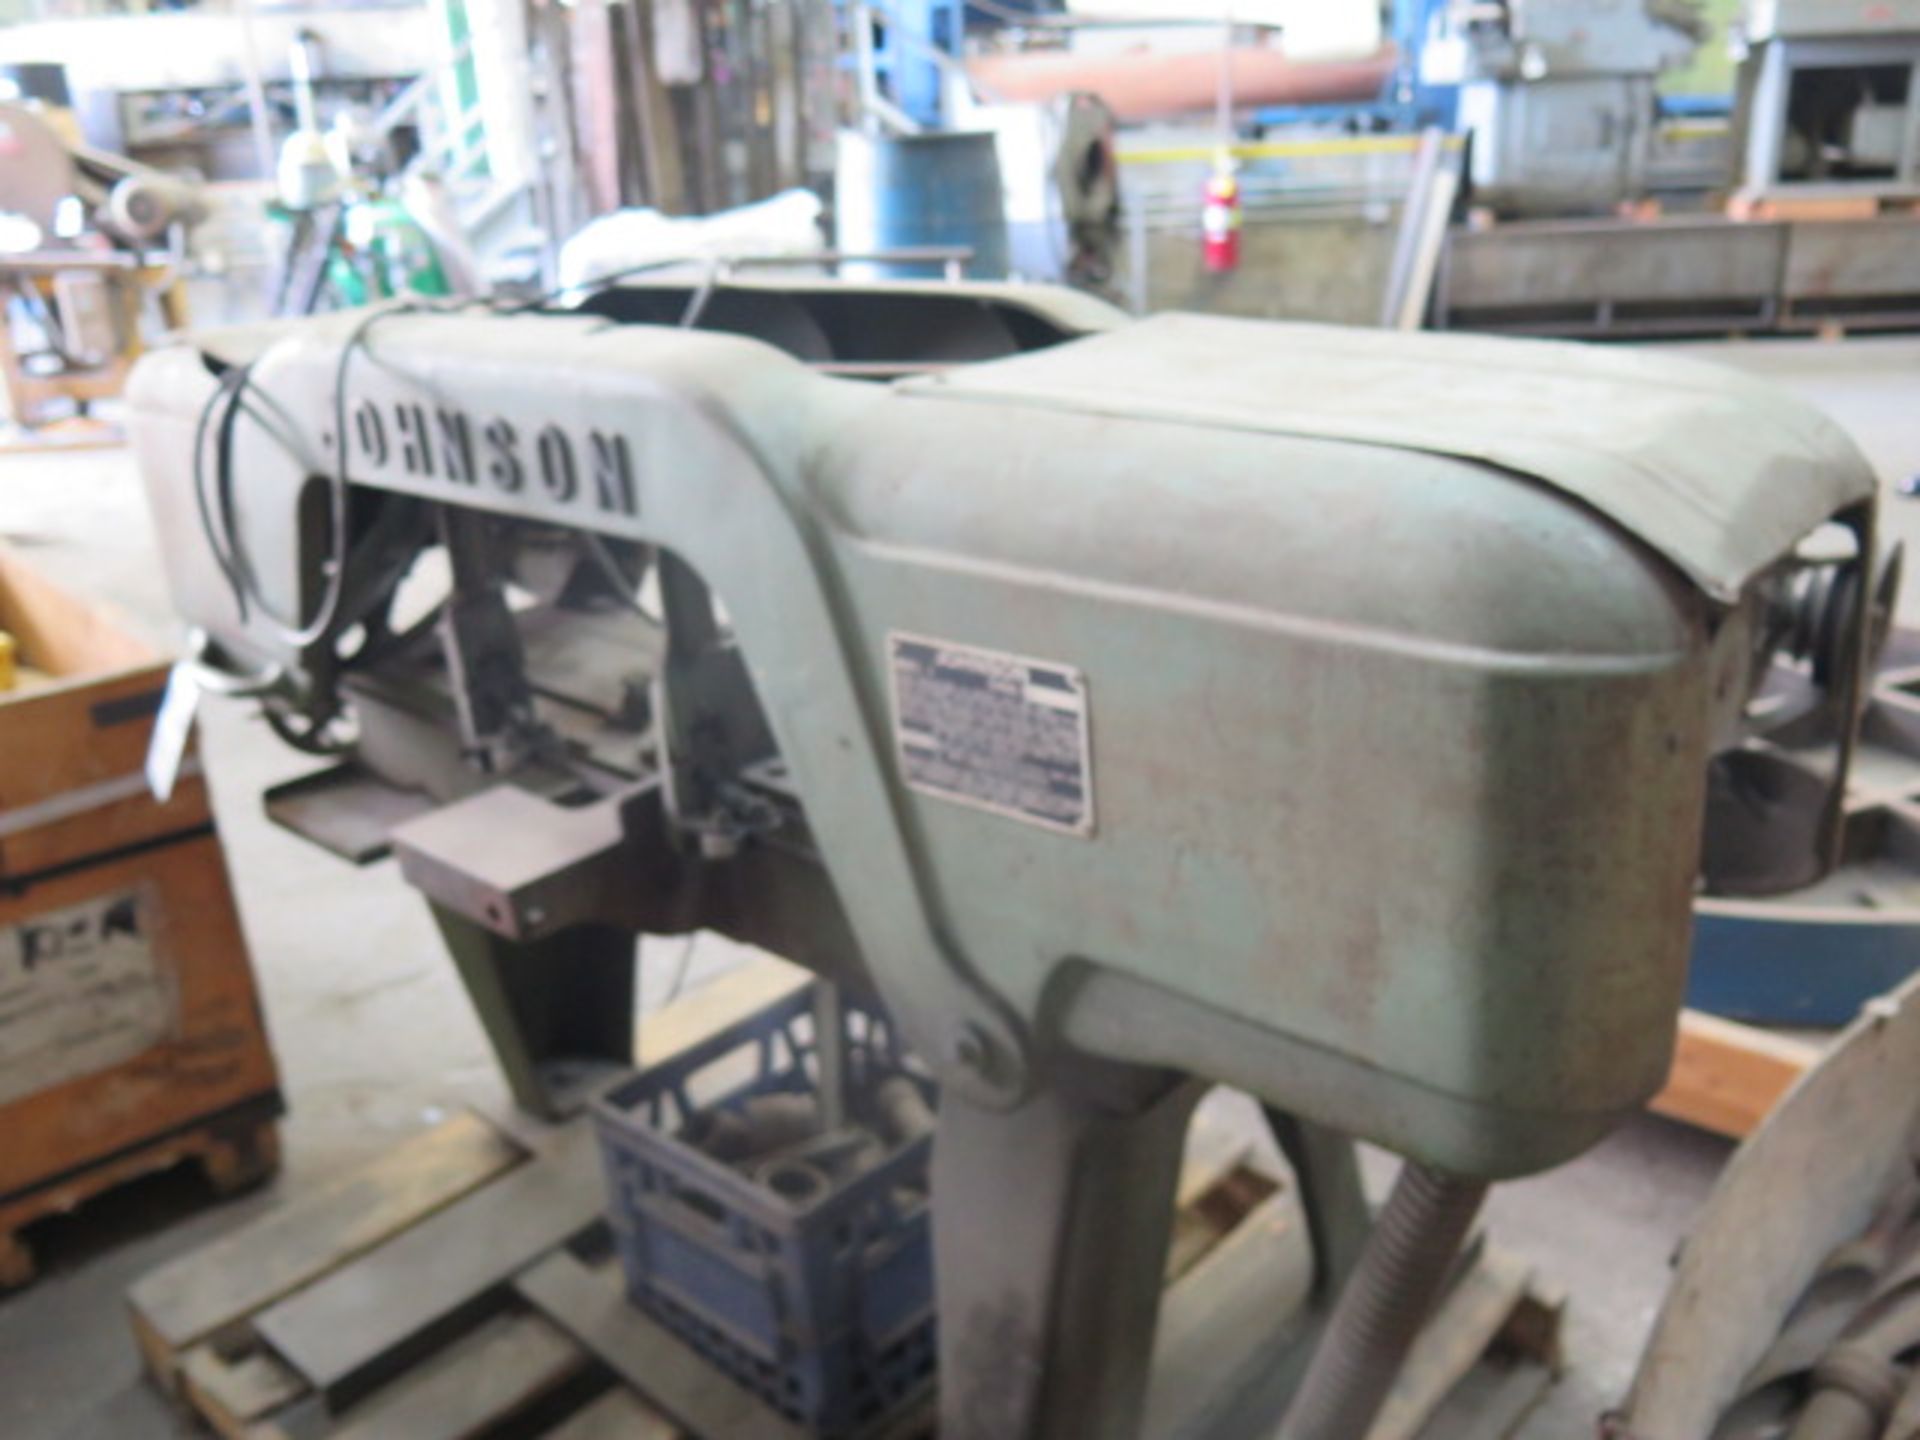 Johnson mdl. J 9" Horizontal Band Saw w/ Manual Clamping (SOLD AS-IS - NO WARRANTY) - Image 4 of 5